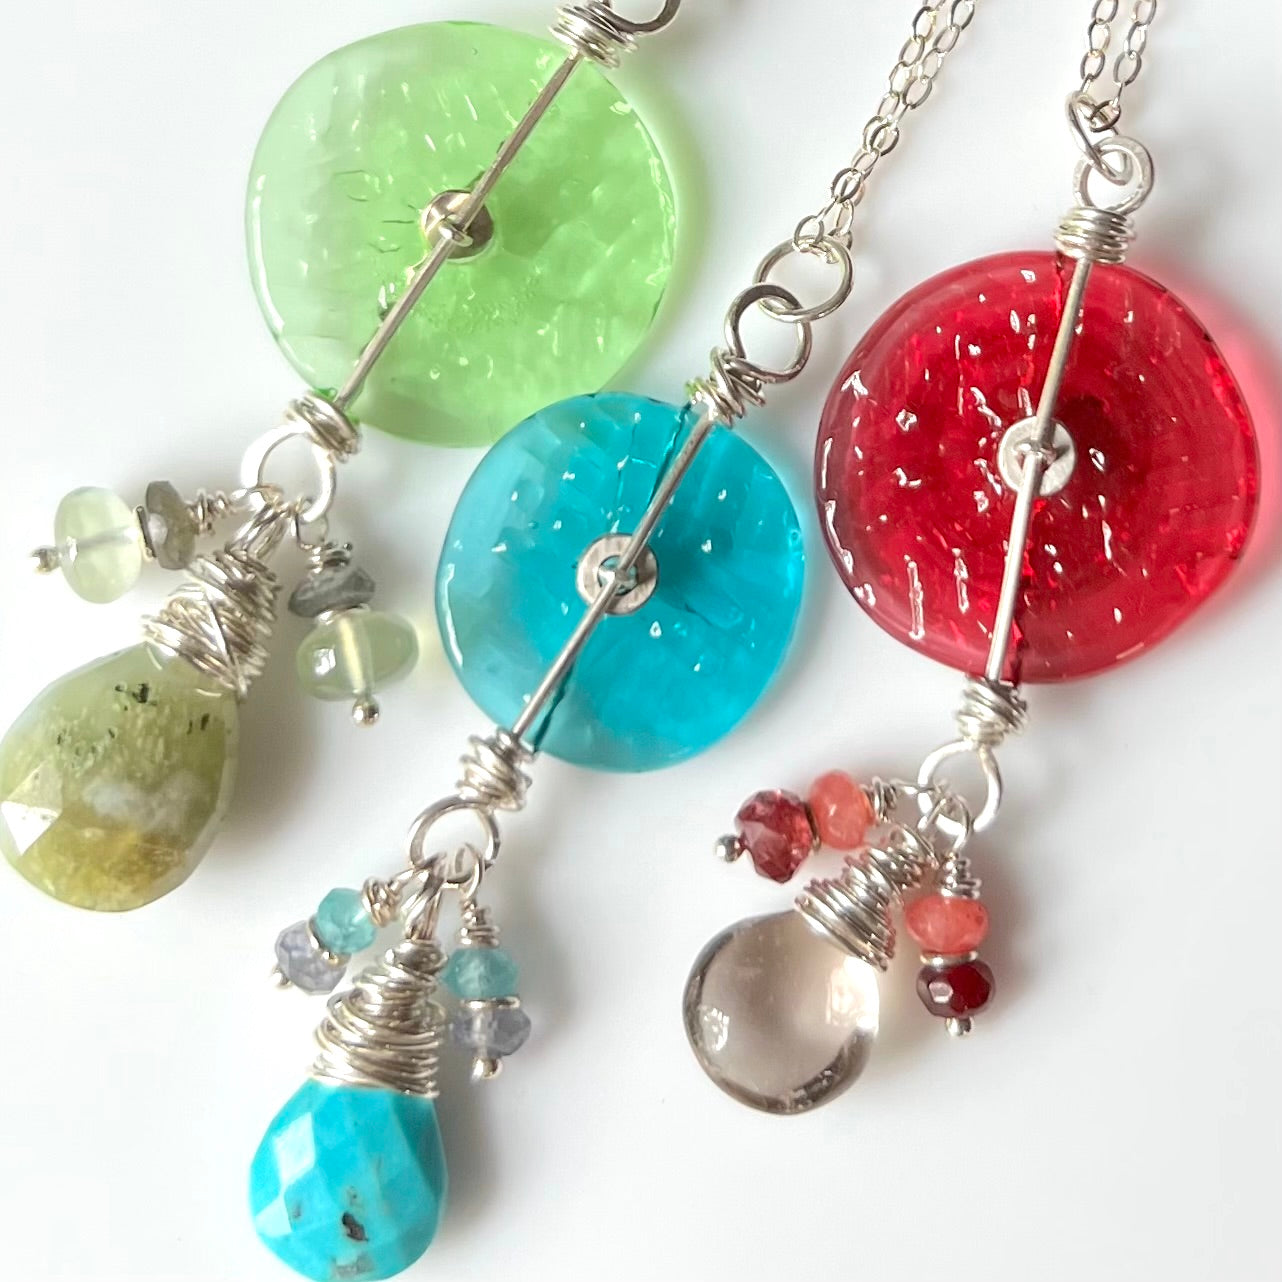 Art Glass and Gem Necklace